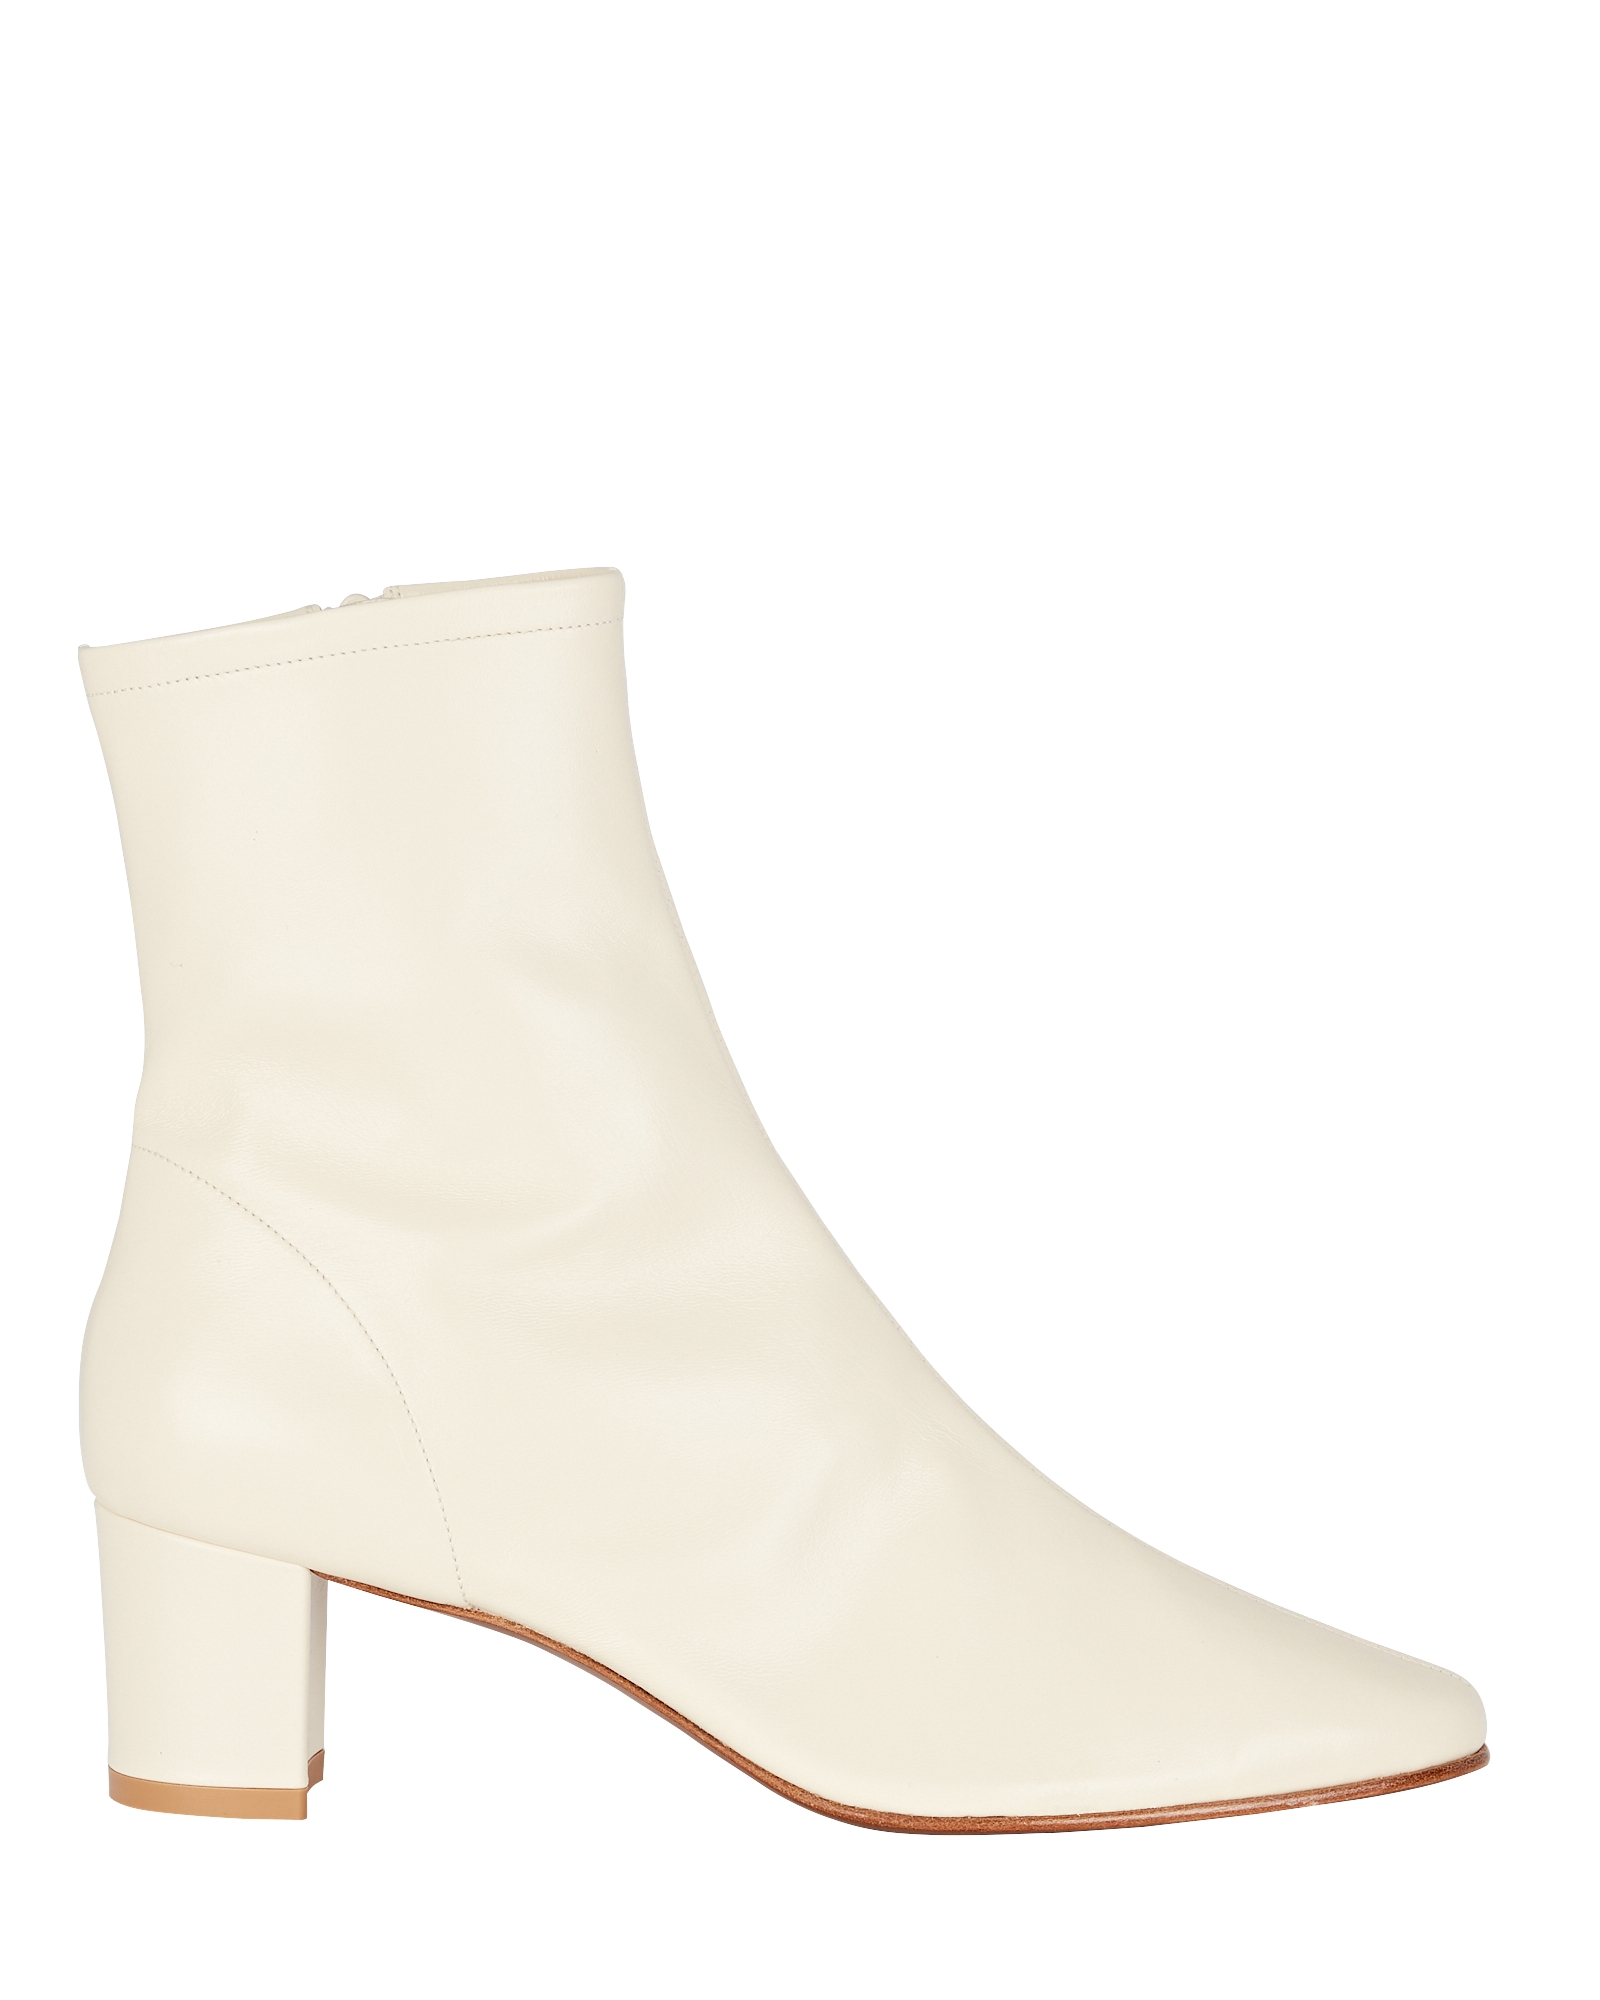 BY FAR Sofia Leather Ankle Boots | INTERMIX®